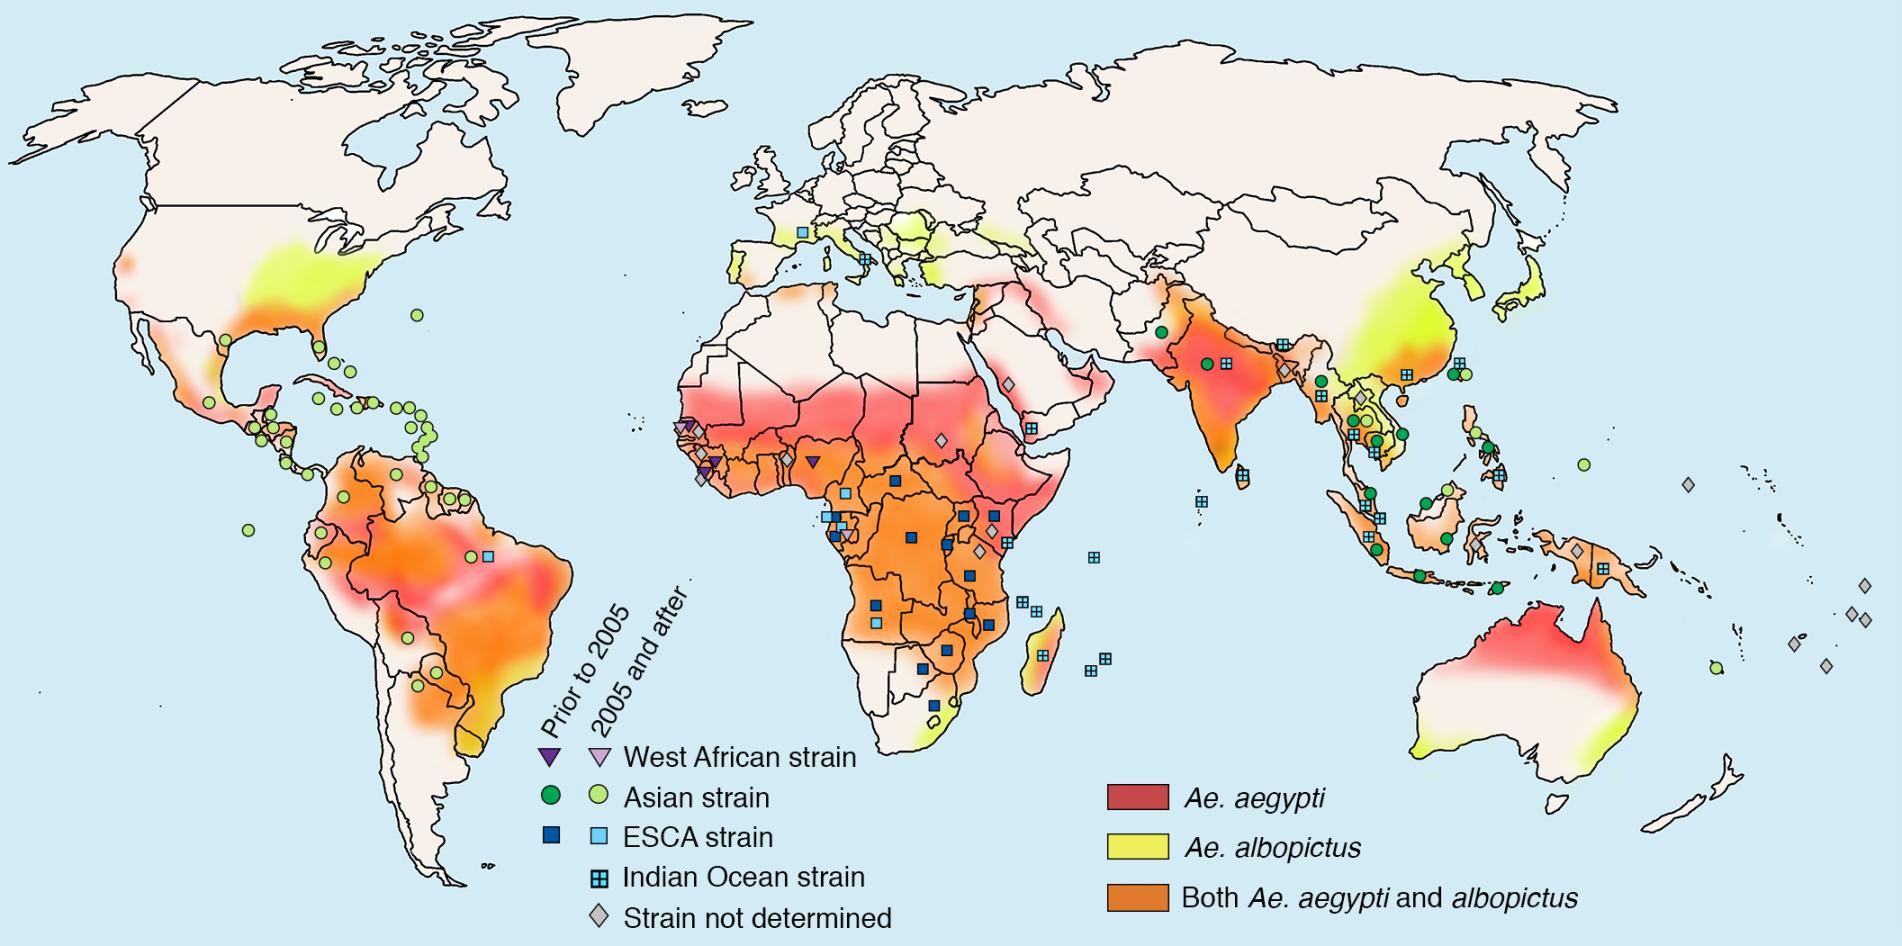 A map of the global prevalence of chikungunya virus and the vectors that spread it.